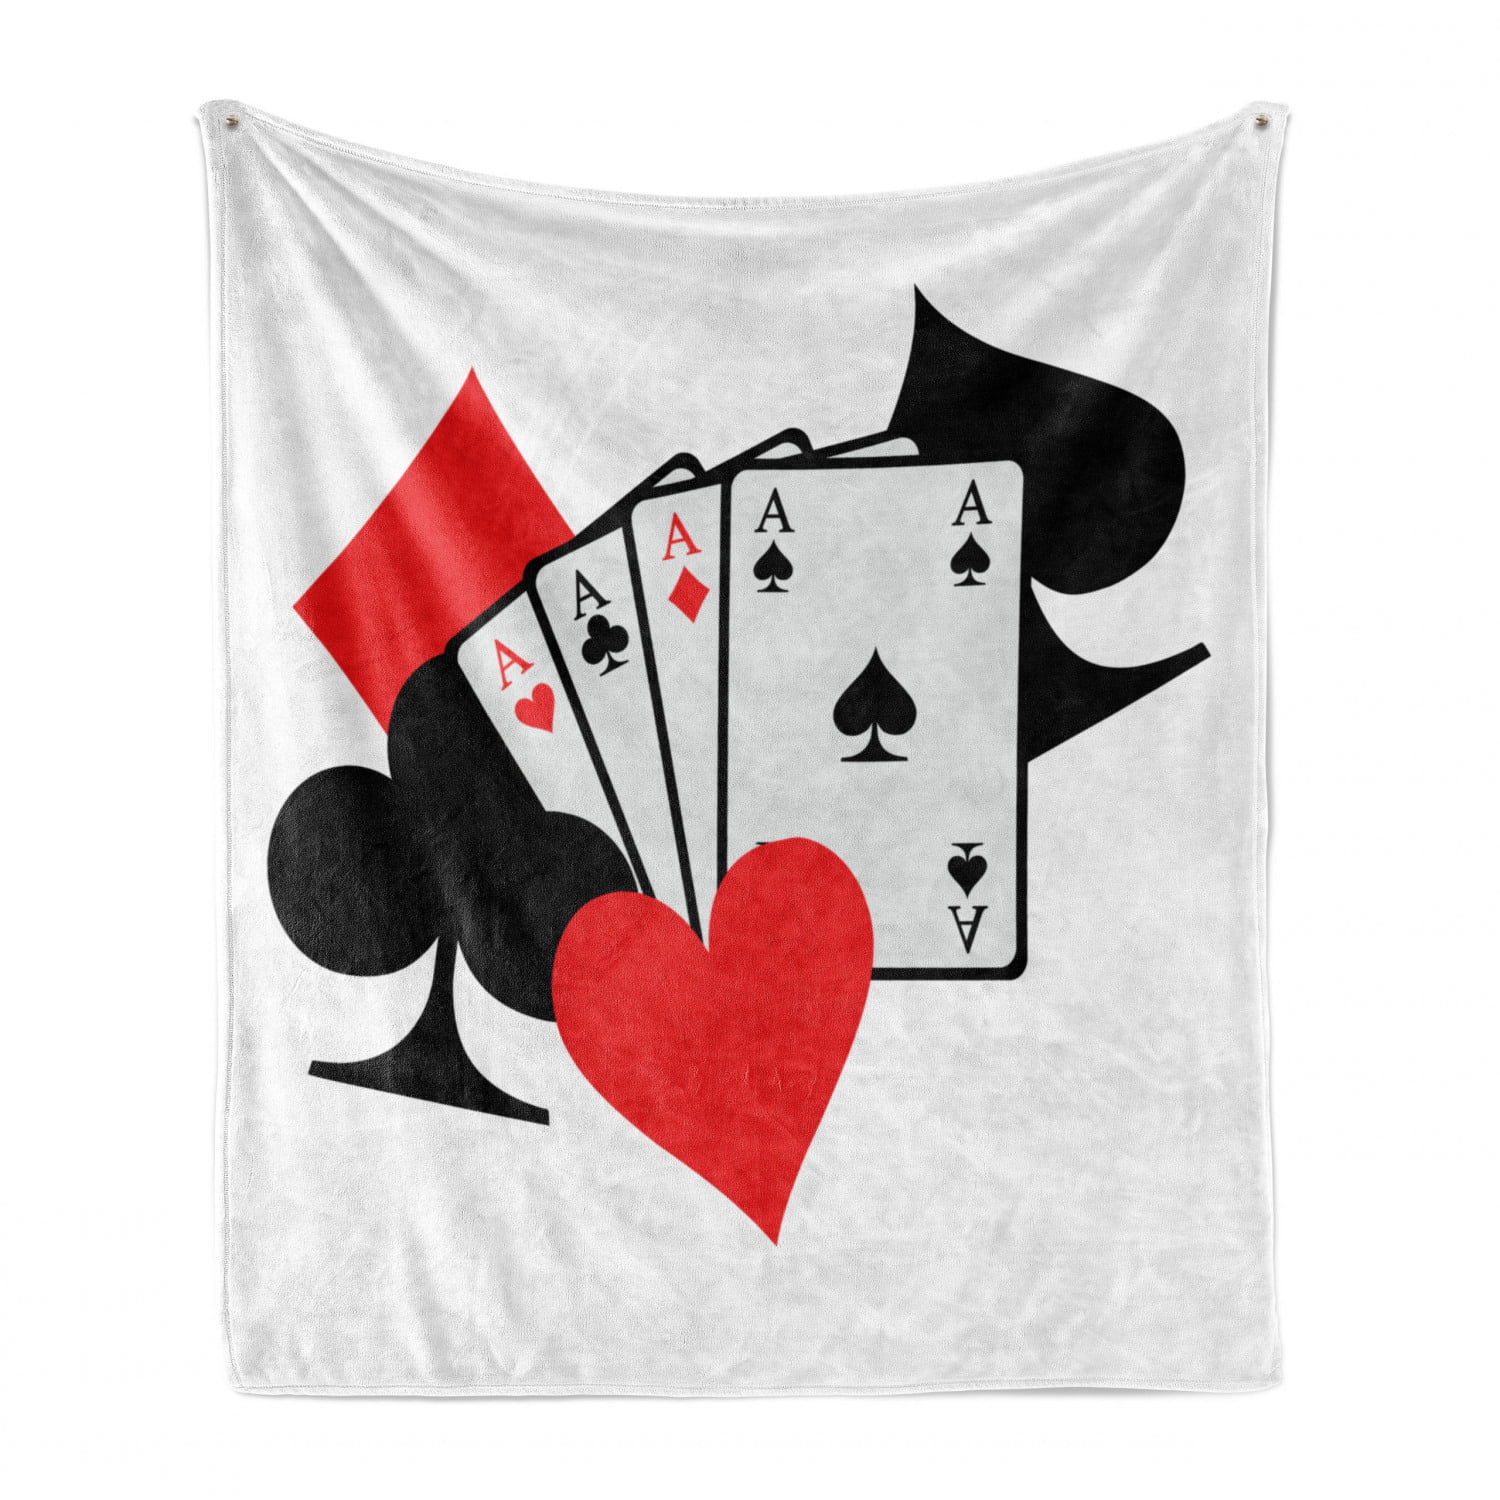 Playing Cards Flannel Fleece Throw Blanket Lightweight Cozy Plush fit Couch Sofa